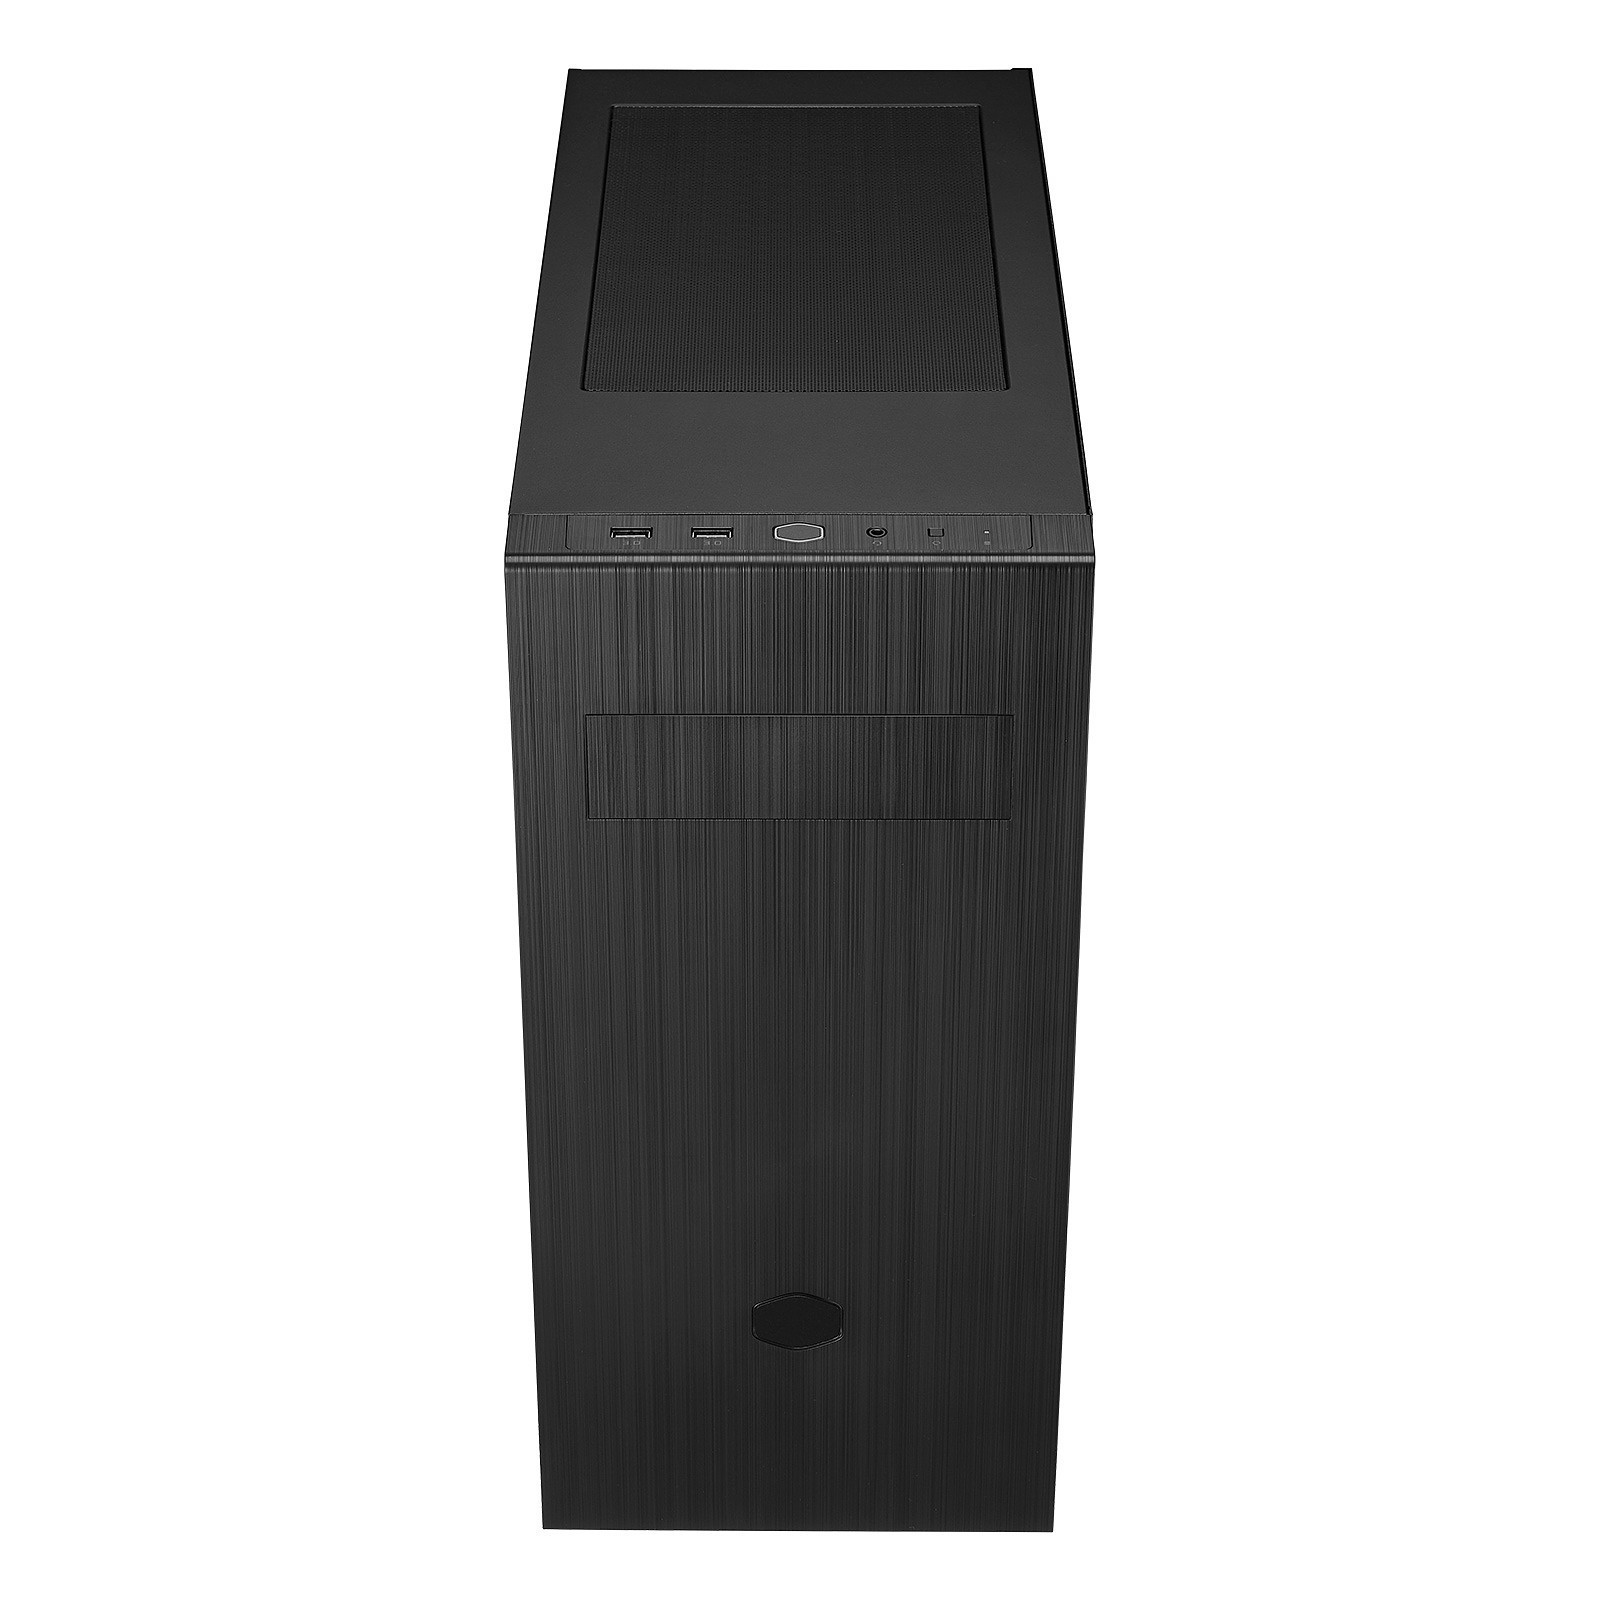 BOITIER COOLER MASTER MASTERBOX MB600L V2 - Tunisie